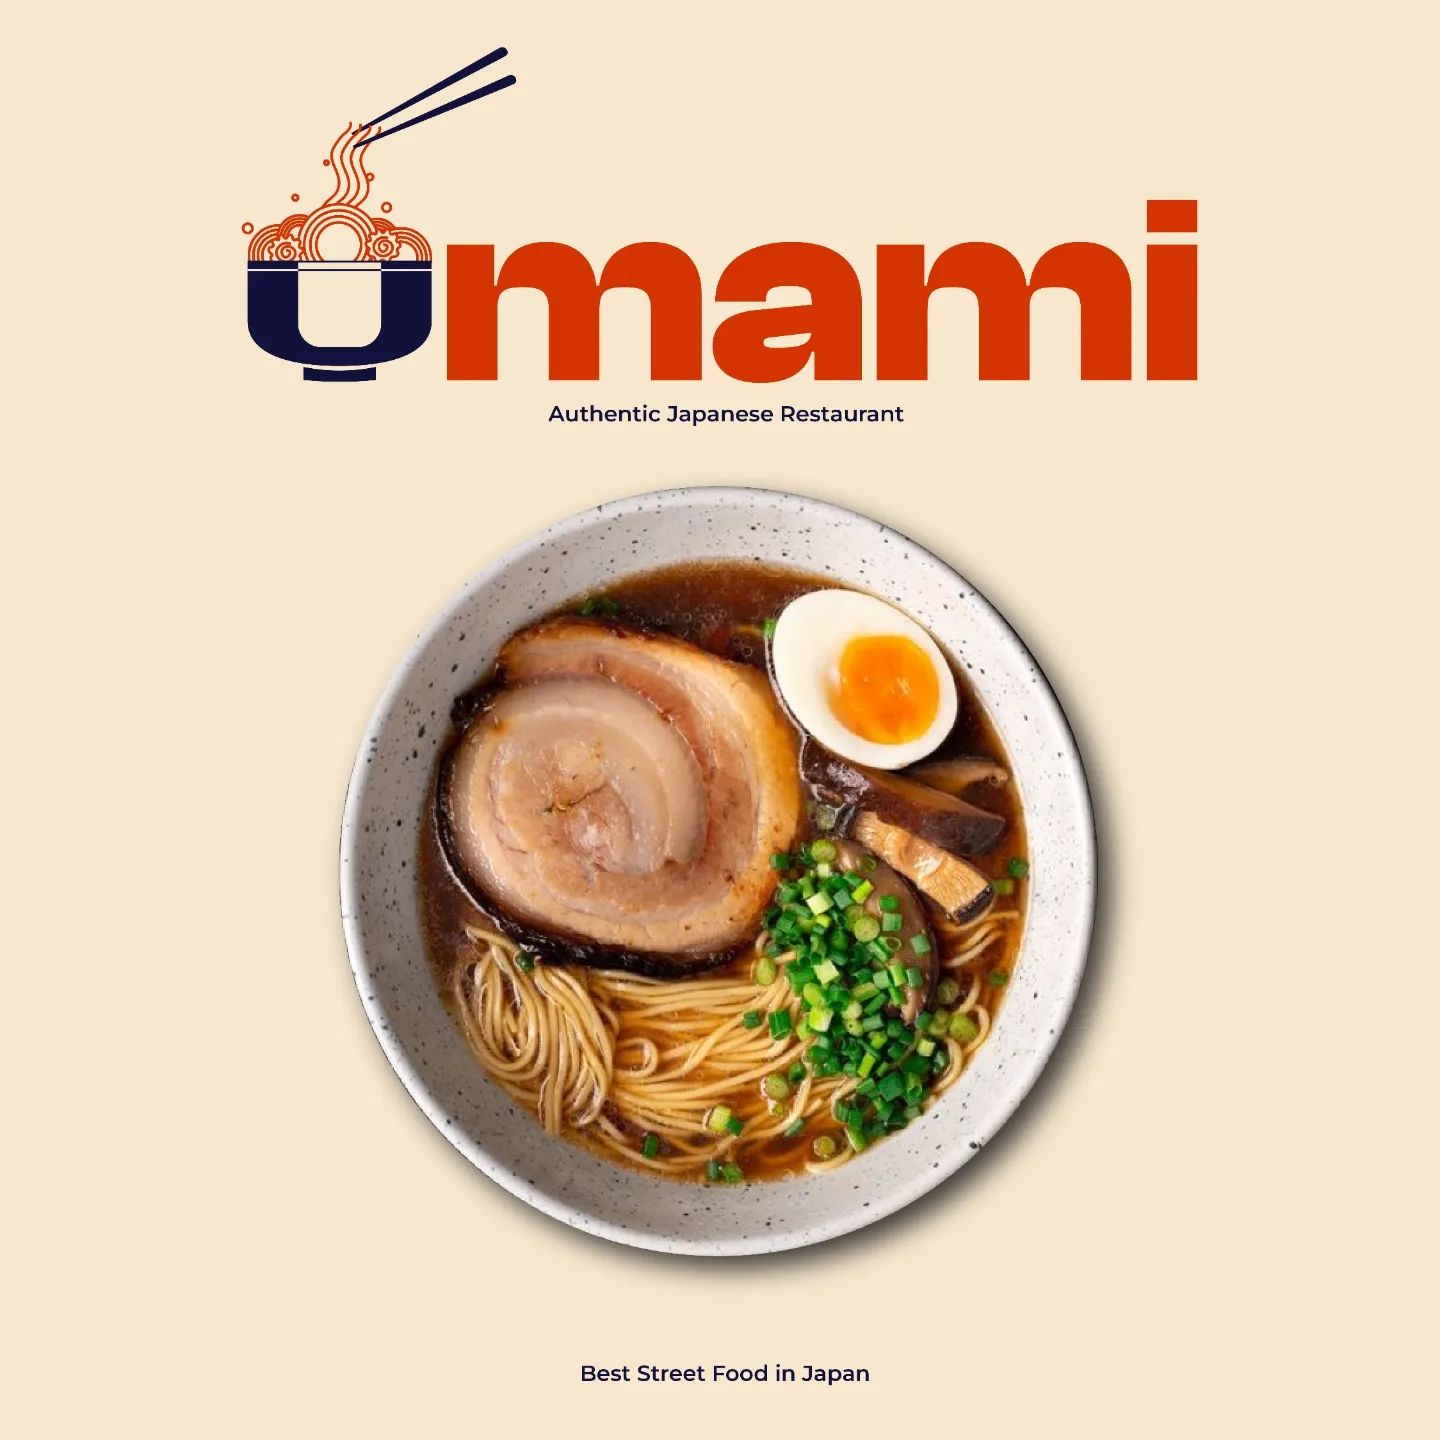 Umami—Brand Identity 🥢

A Japanese street food restaurant. They offer a diverse menu in an authentic and urban setting f